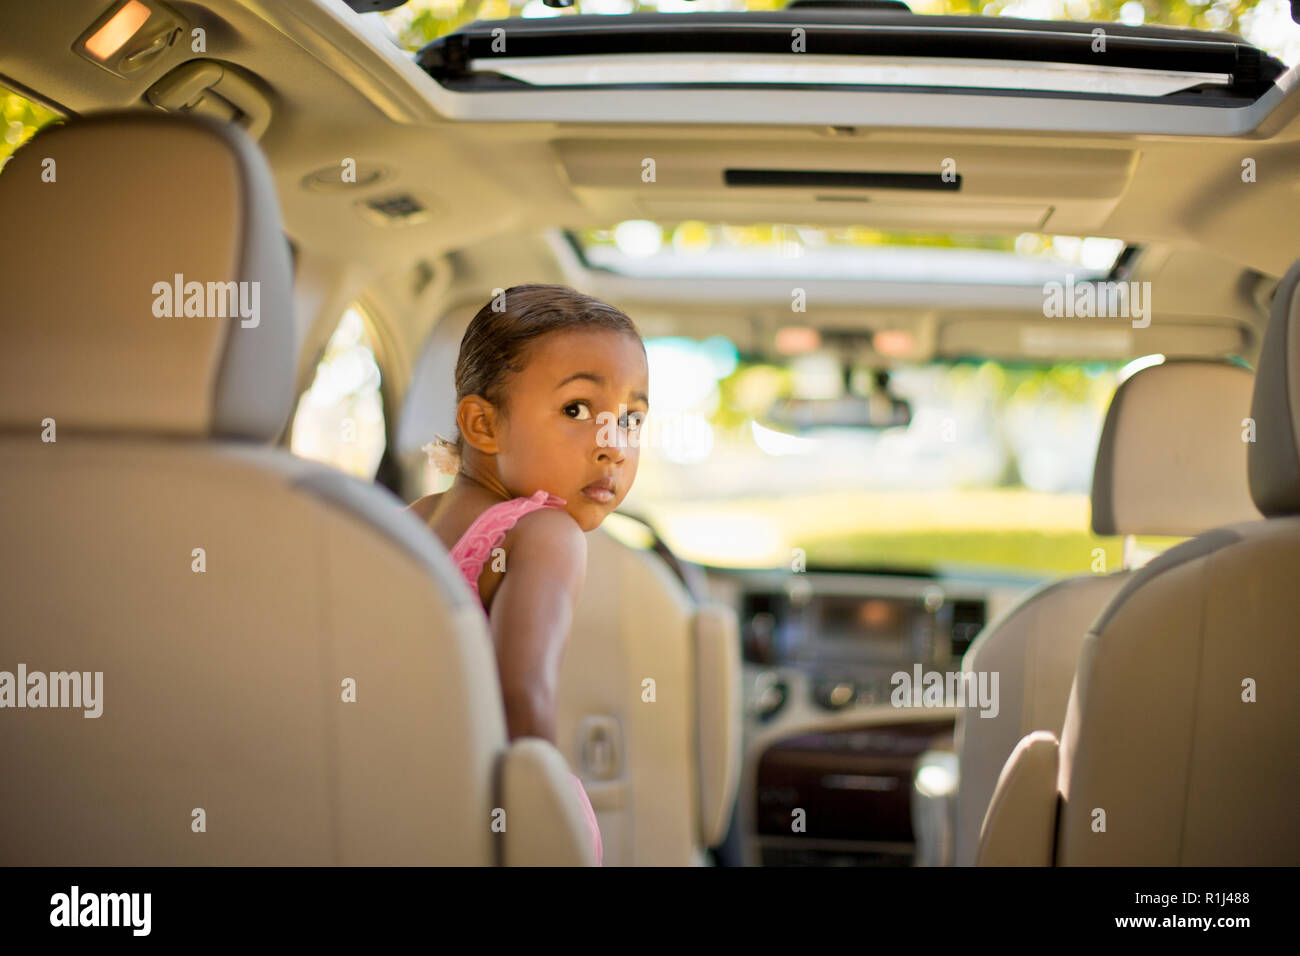 Young girl dressed as a ballerina pretending to drive a car. Stock Photo